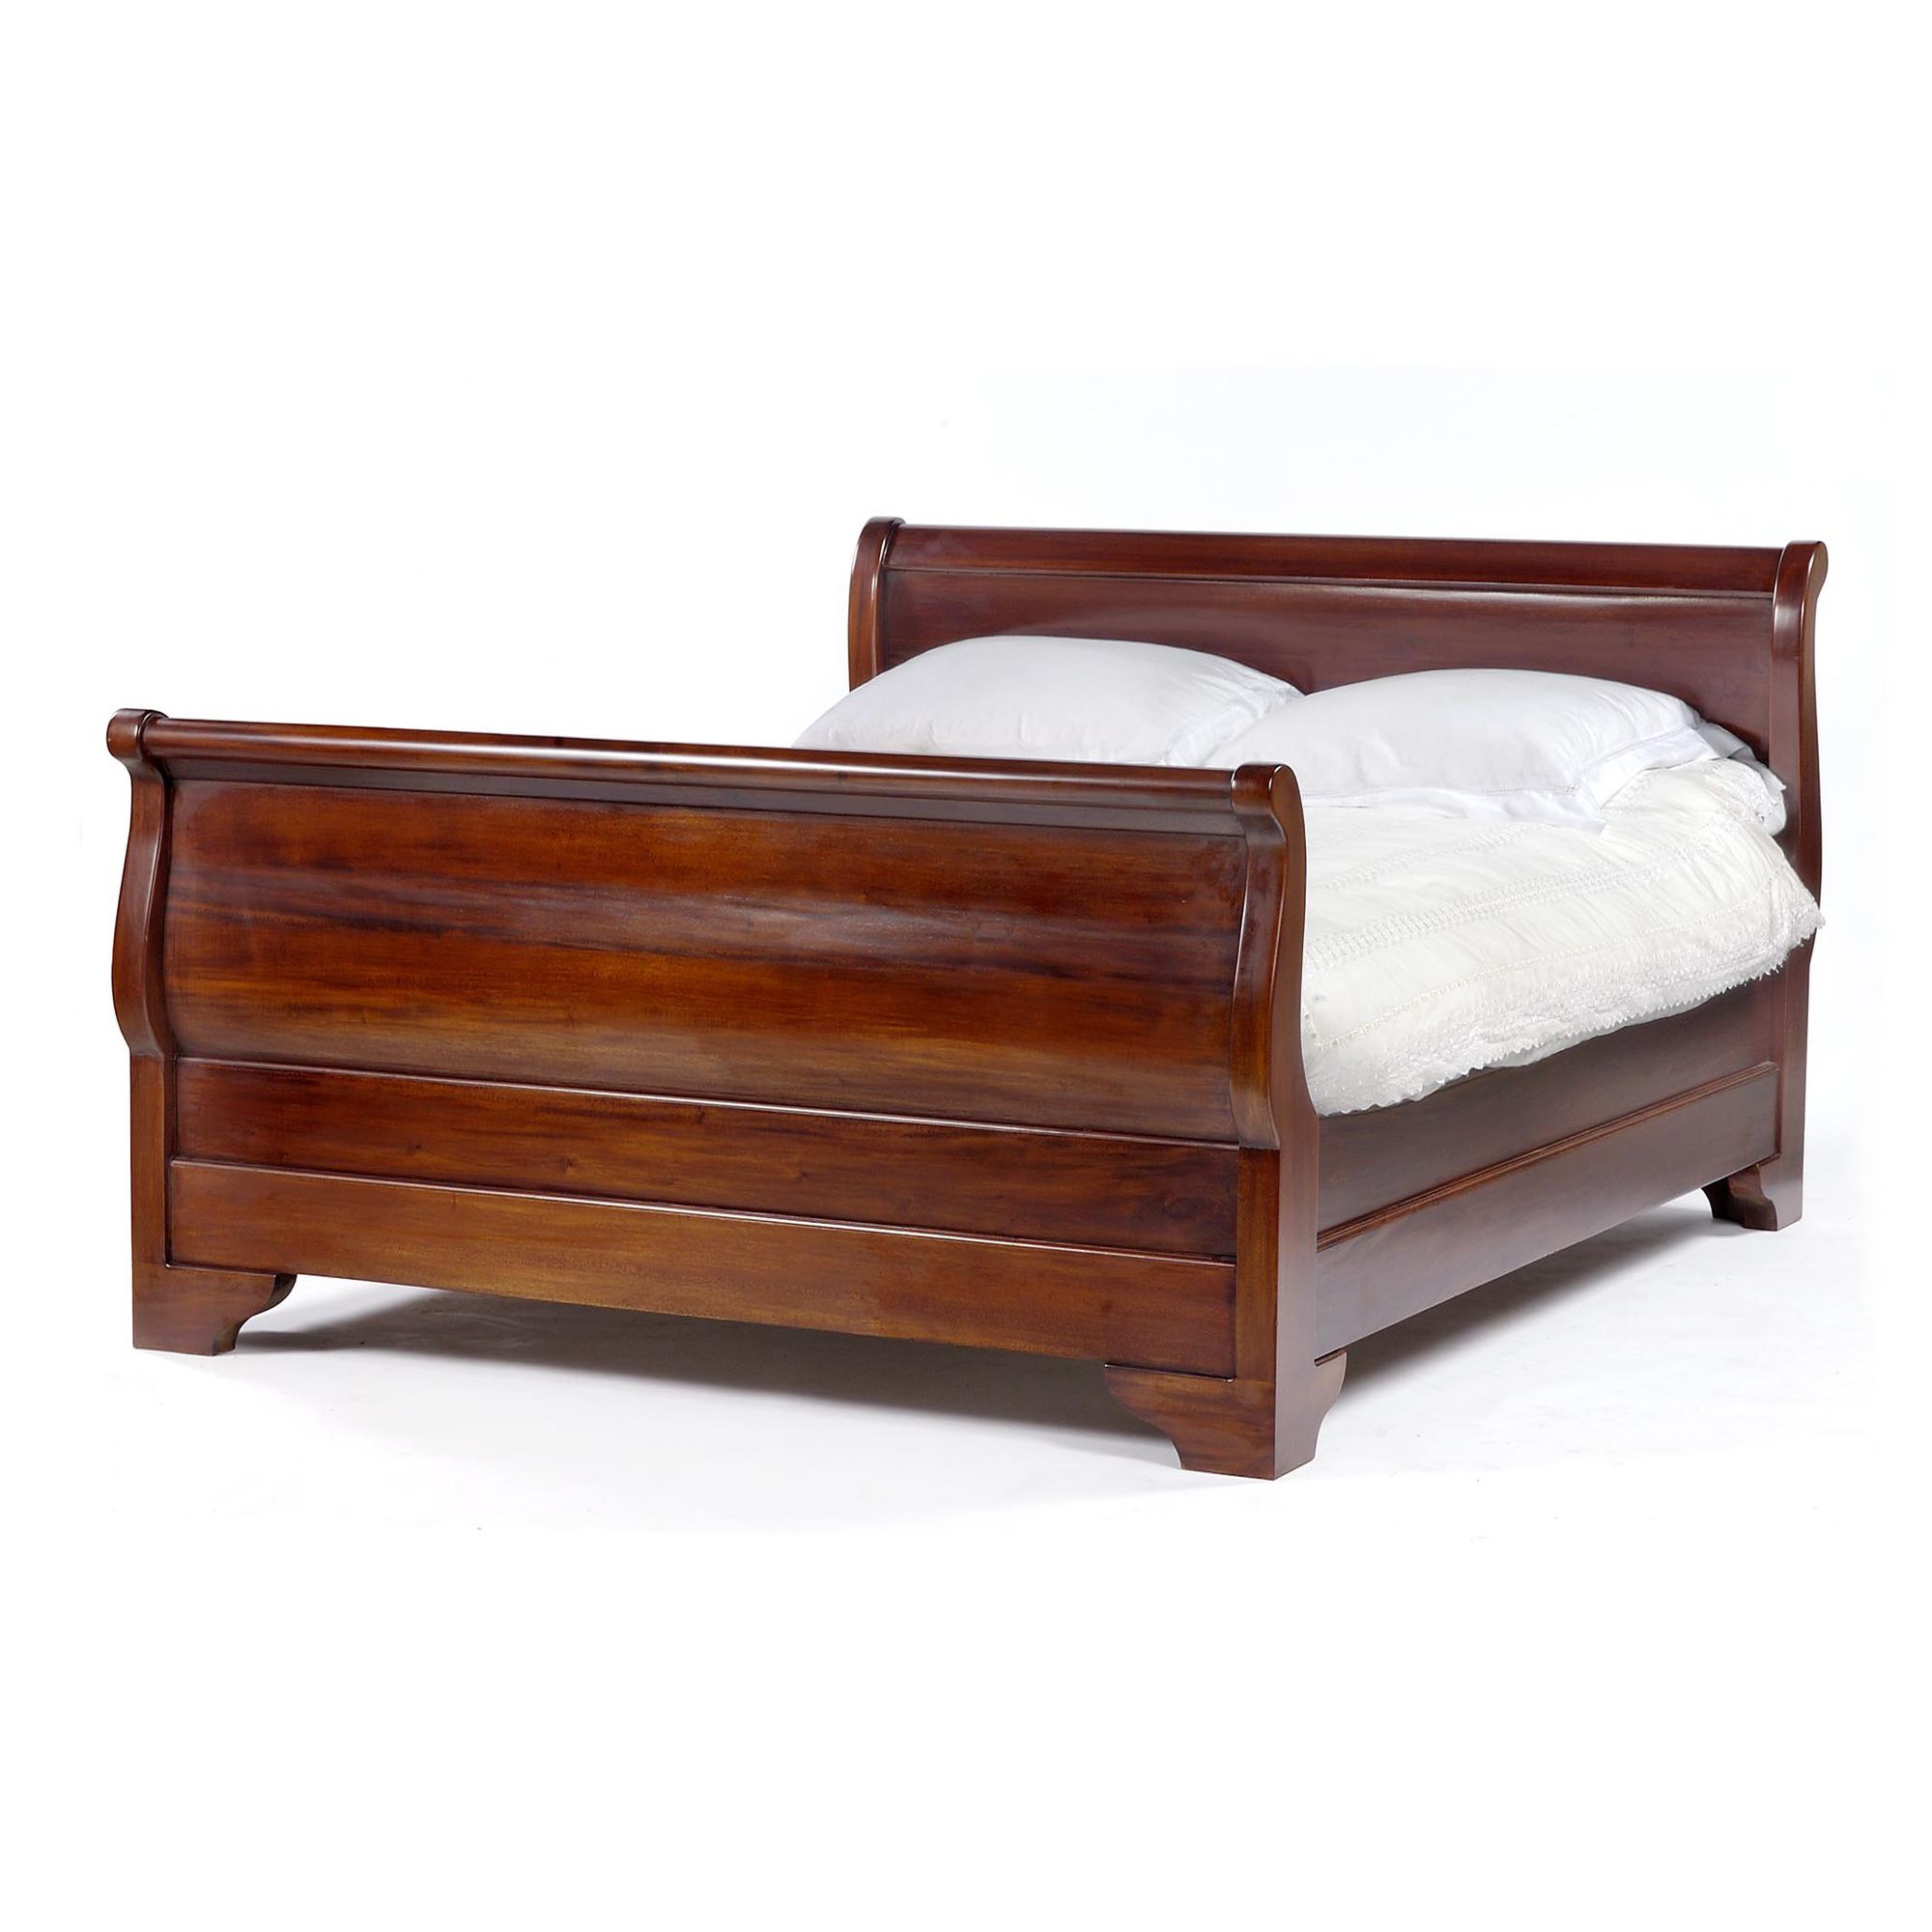 Anderson Bradshaw High-Back Sleigh Bed Frame - Double at Tesco Direct